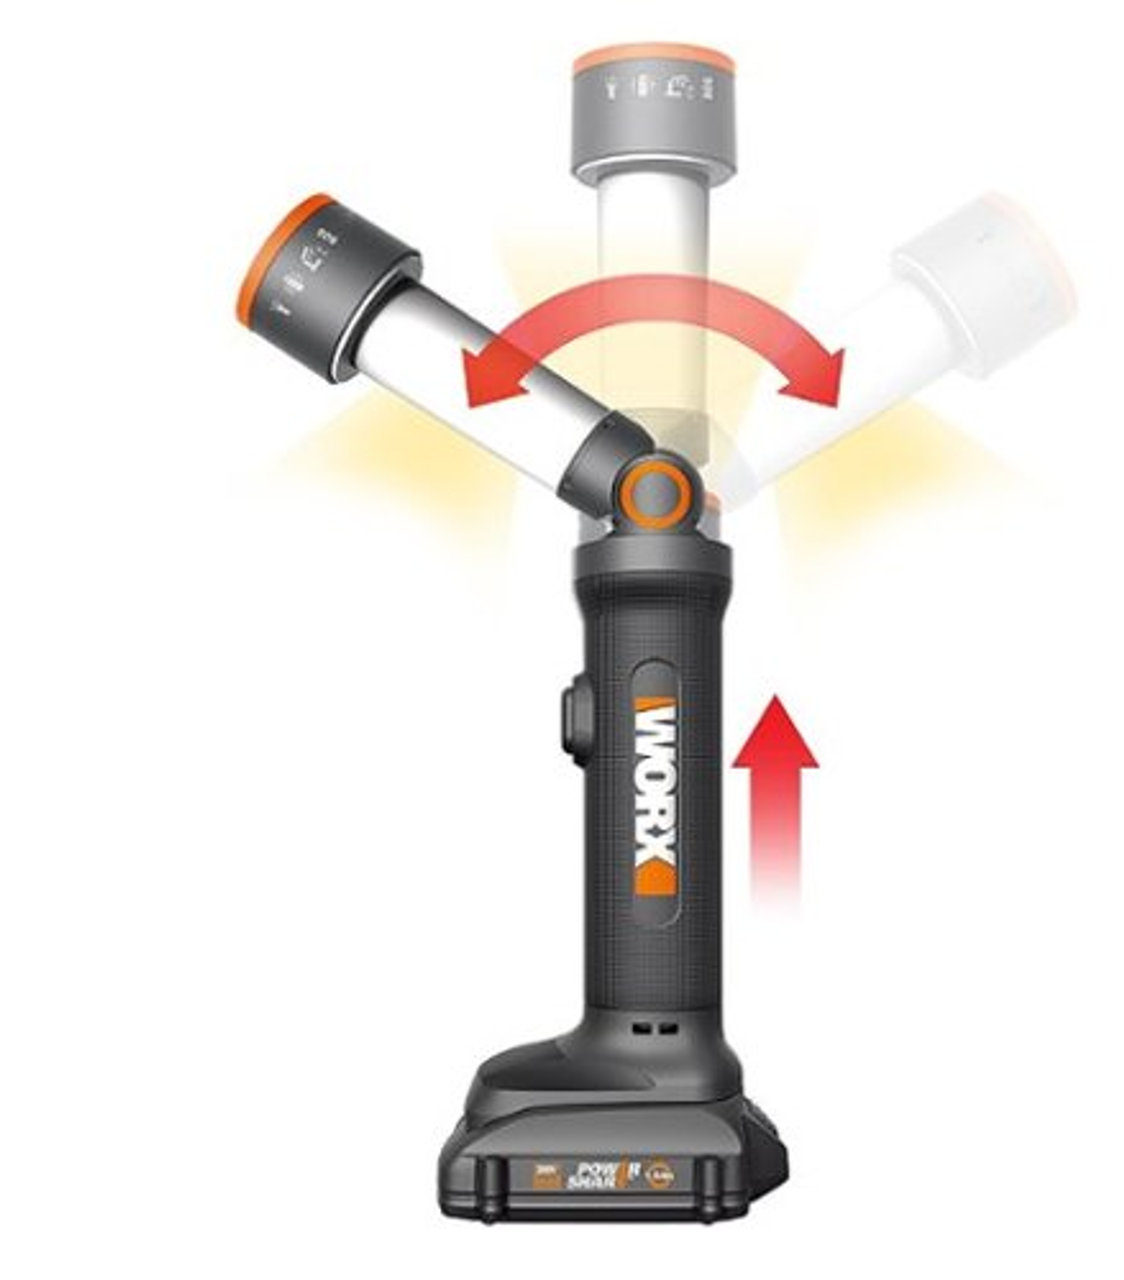 Worx WX027L 20V Power Share Multi-Function LED Flashlight (Battery & Charger Included)